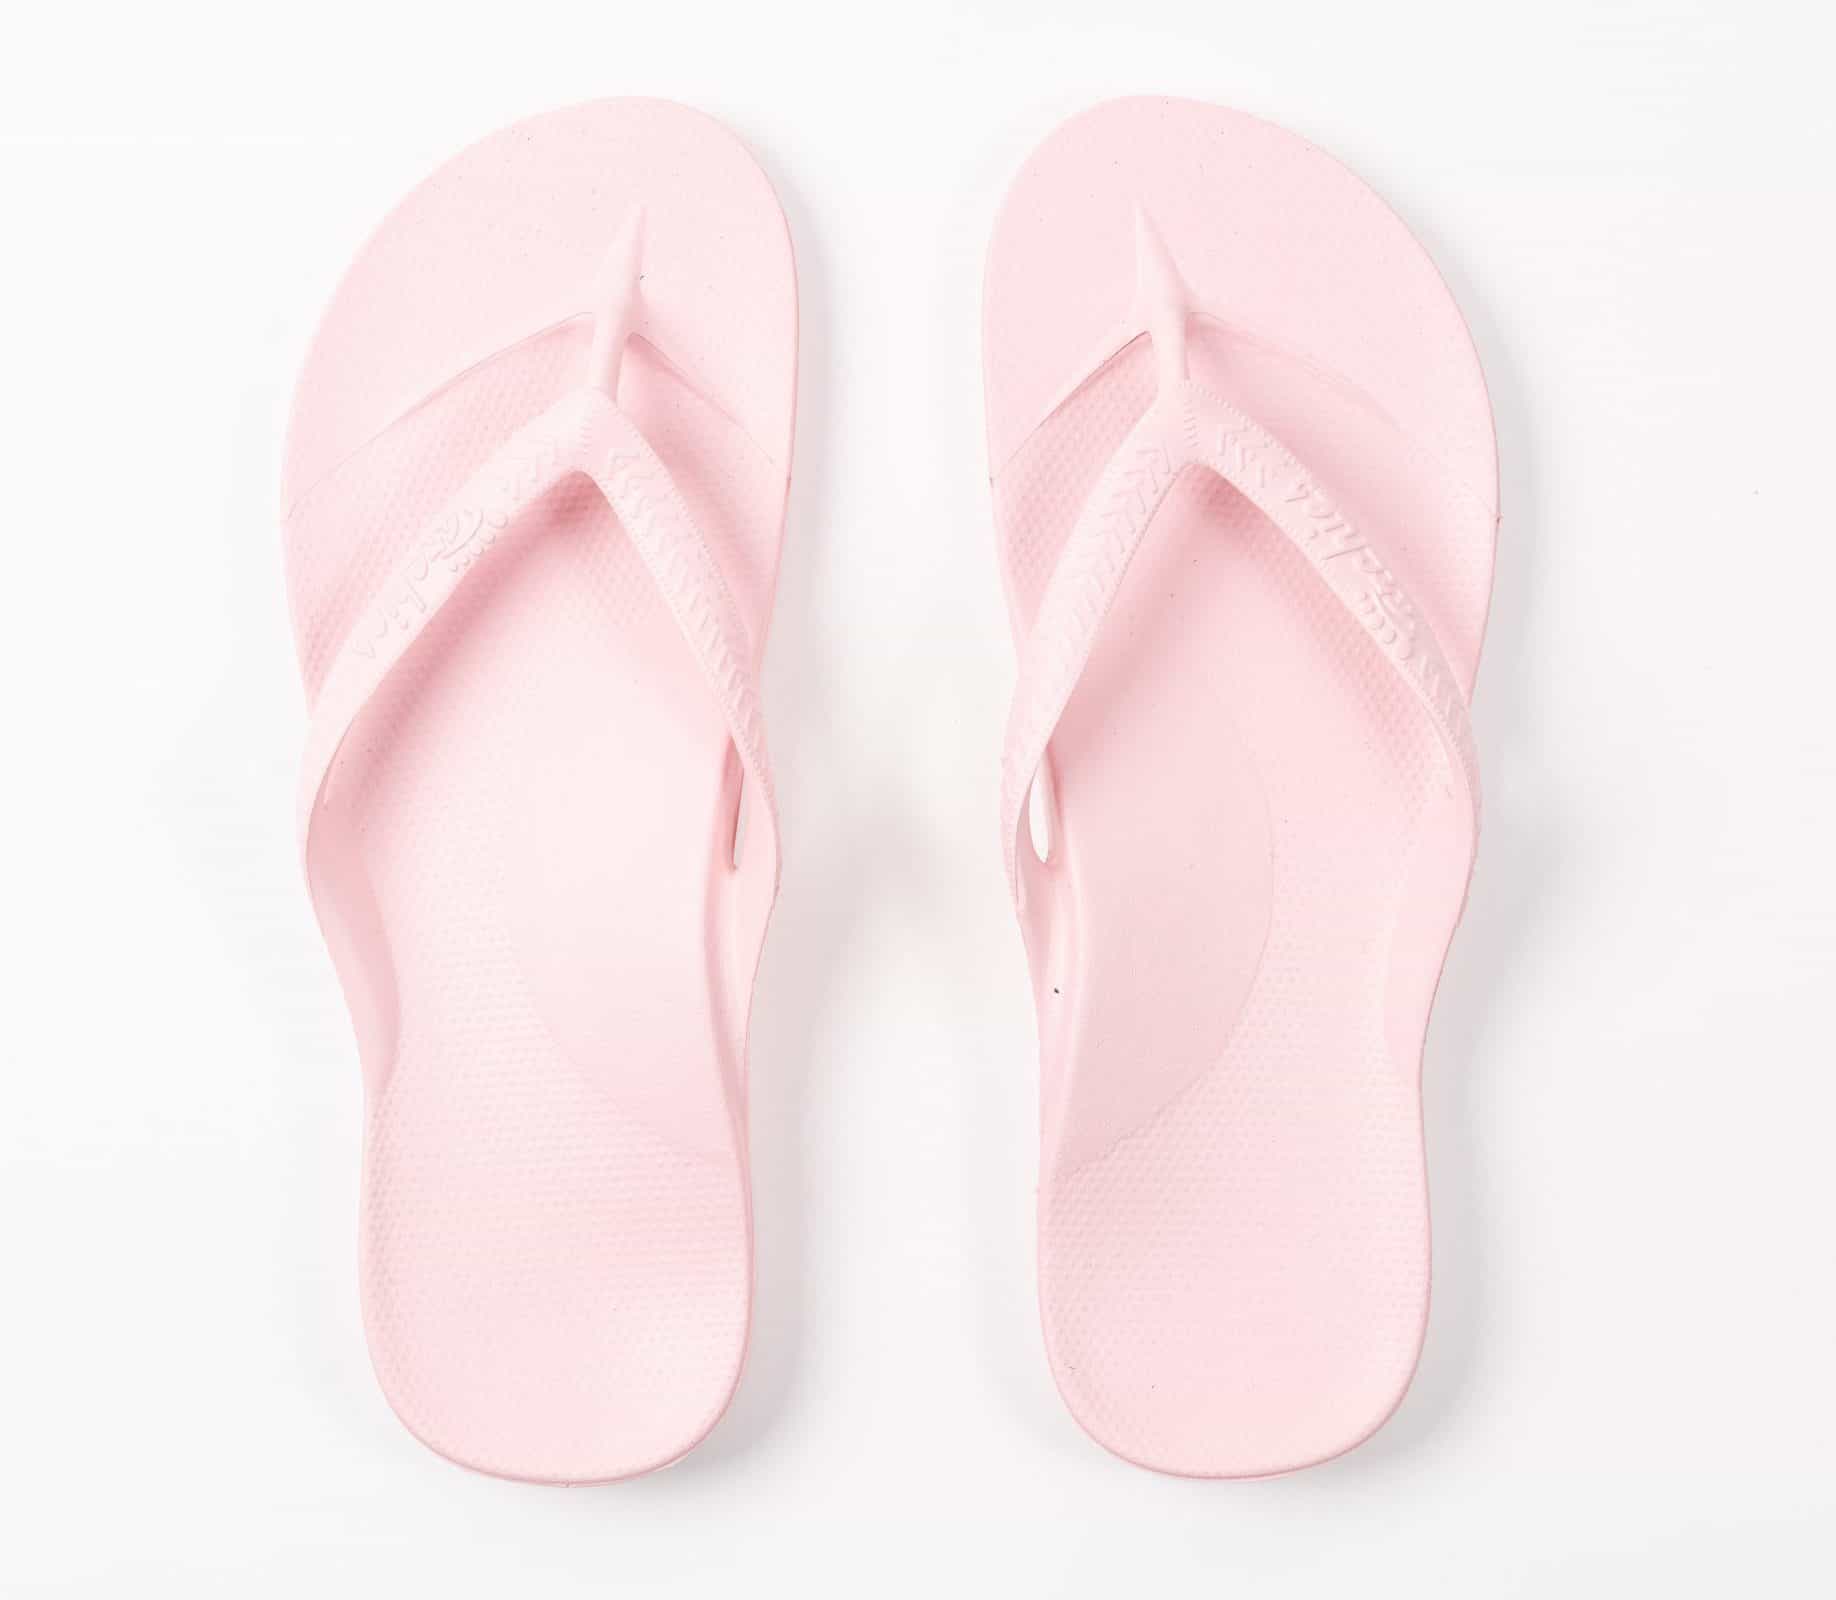 Archies Archies Arch Support Flip Flop Pink